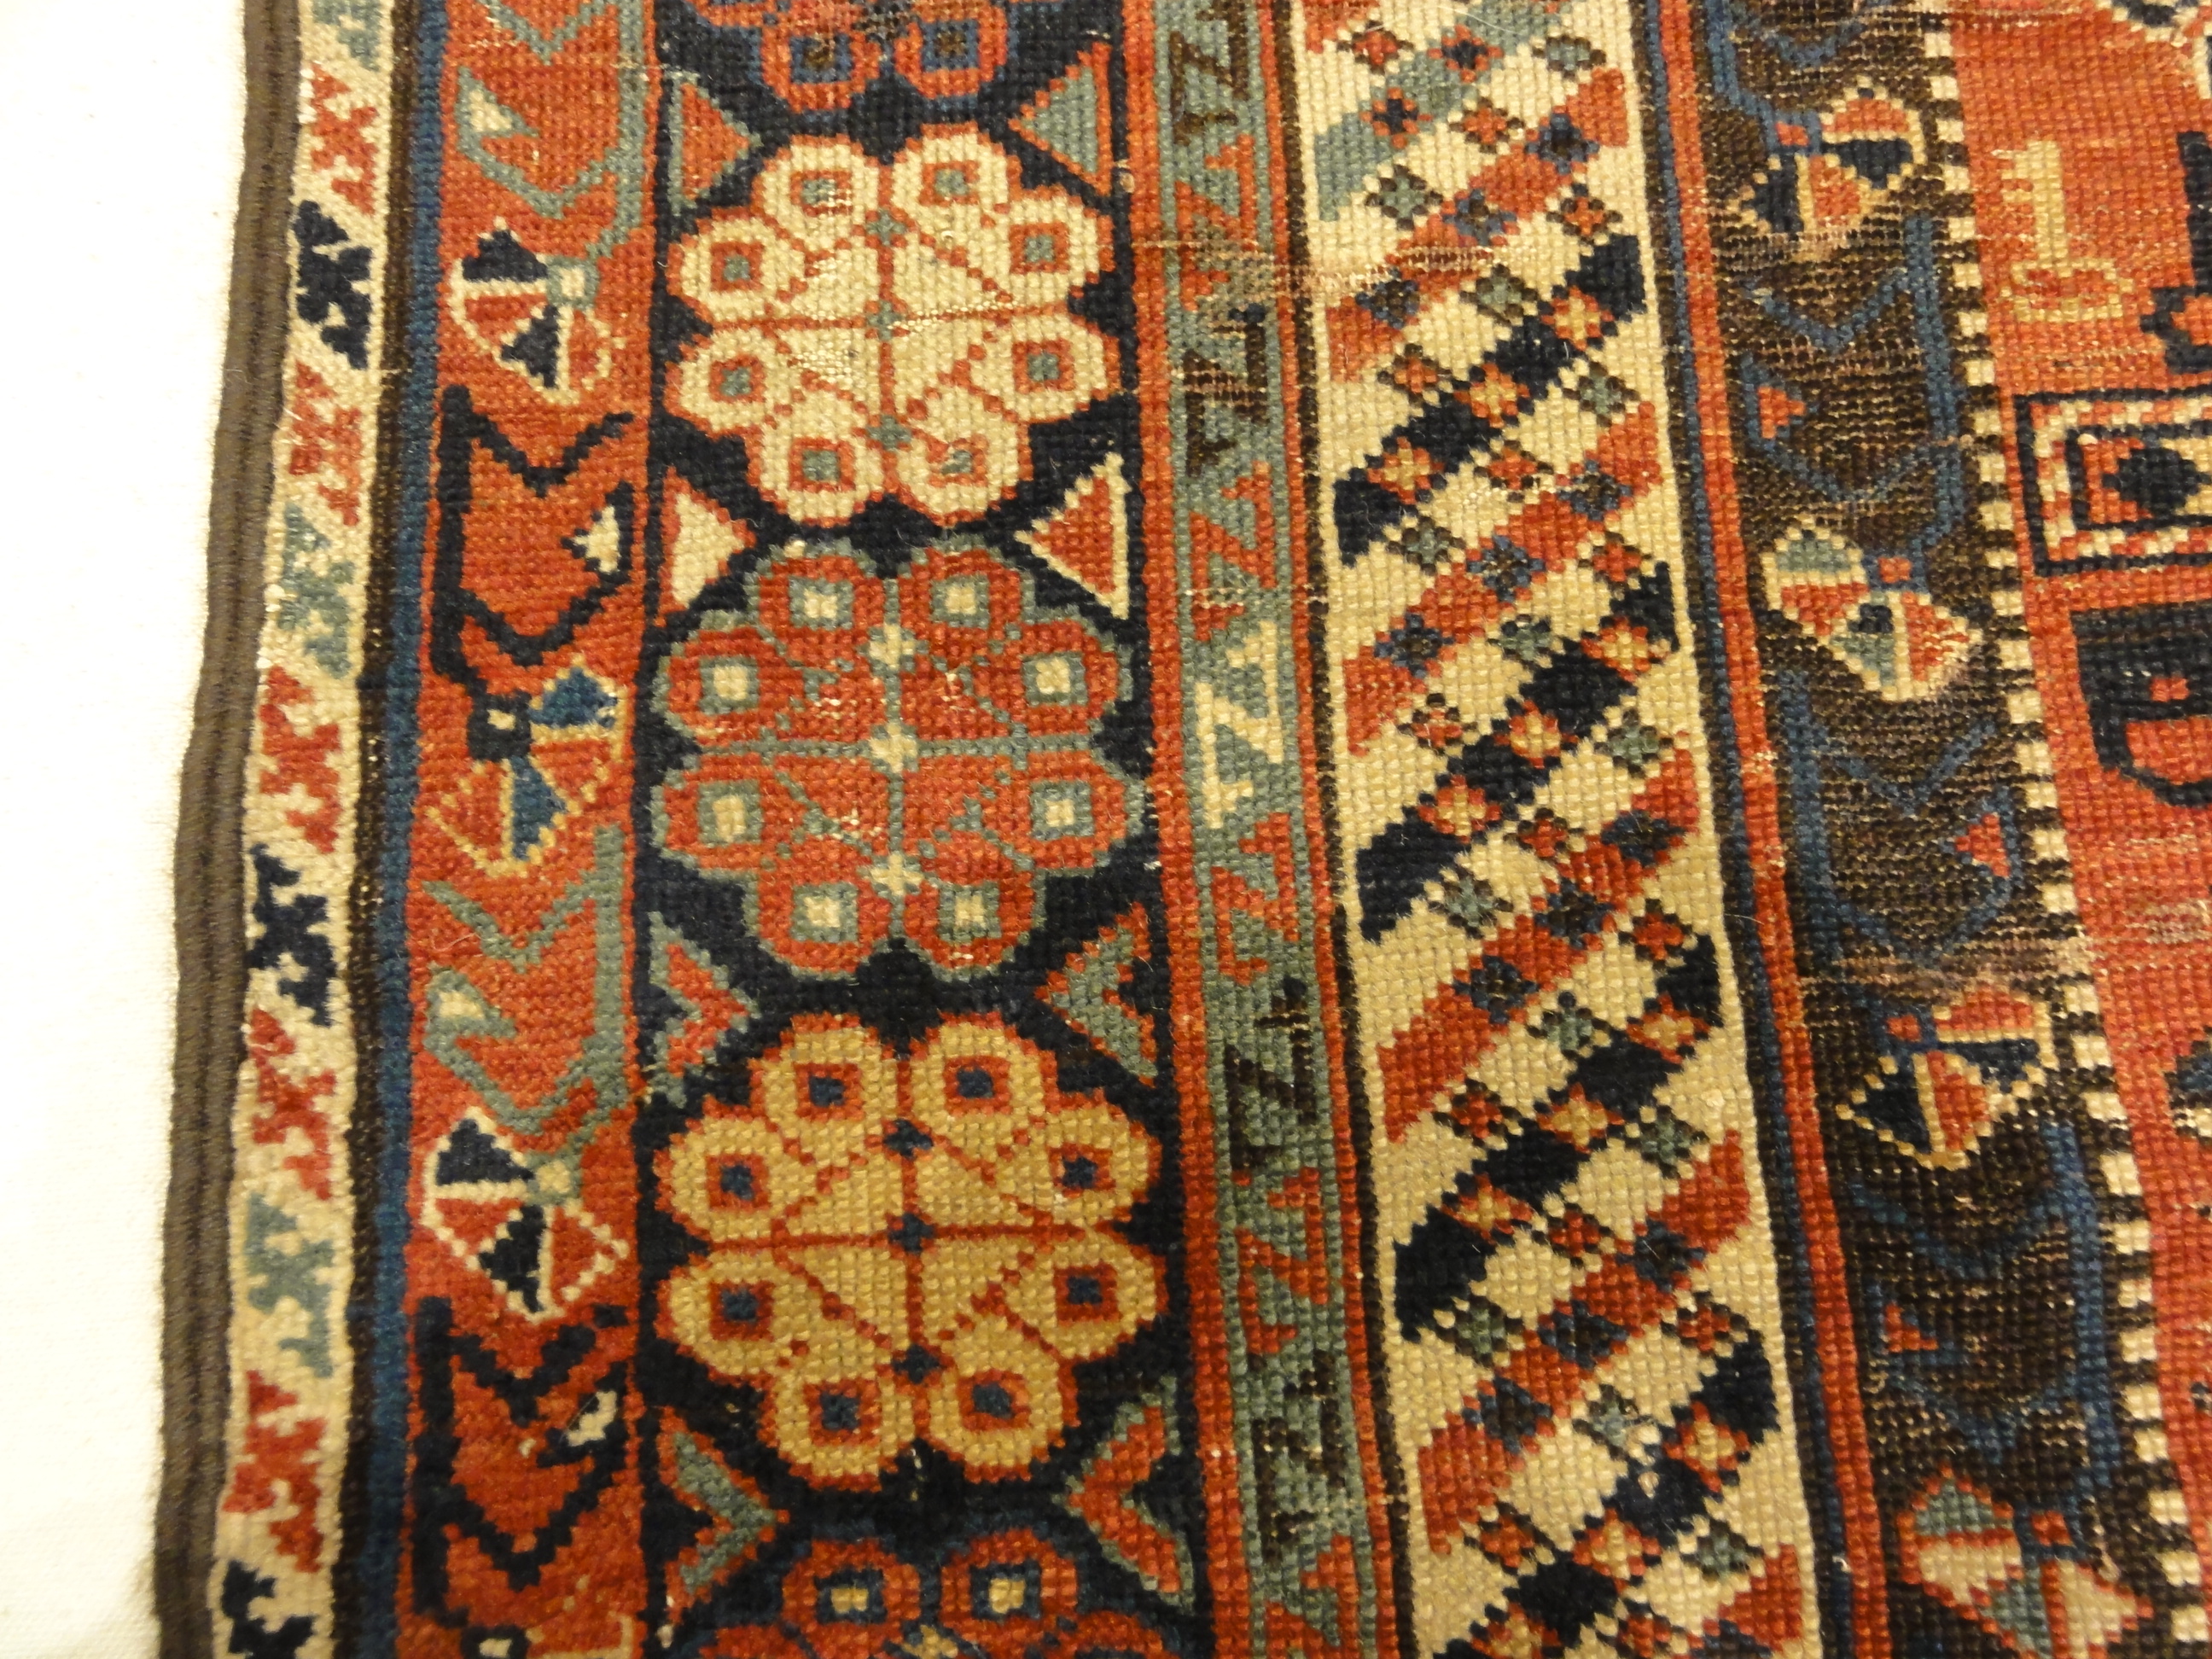 Fine Antique Shirvan Woven by an Armenian Girl. A piece of genuine authentic woven carpet art sold by the Santa Barbara Design Center Rugs and More.